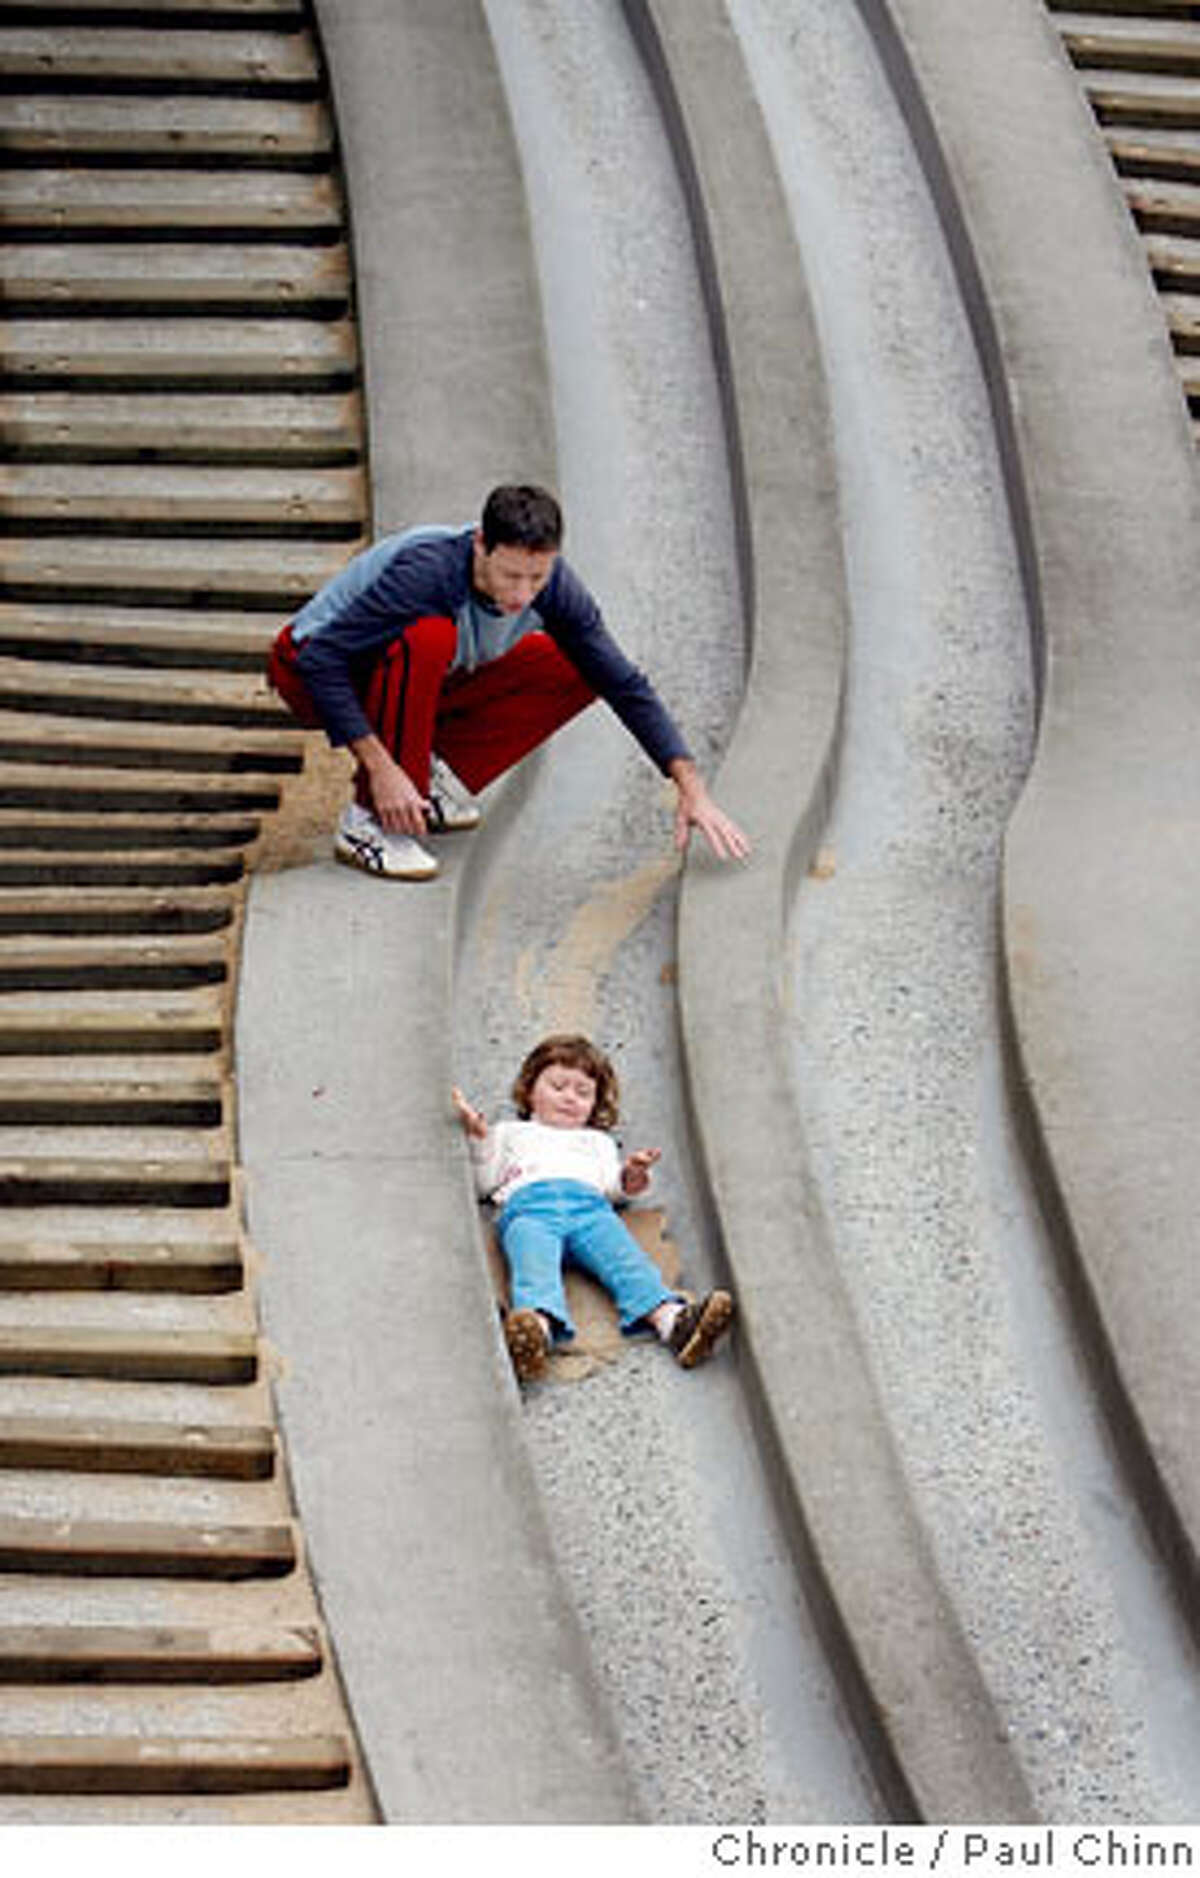 Gil Heiman helps his daughter Ines, 3, slip down the concrete slide at the Children's Playground which reopened at Golden Gate Park in San Francisco, Calif. on Saturday, July 14, 2007. The $3.8 million renovation project on the playground, that originally opened in 1887, took a year-and-a-half to complete. PAUL CHINN/The Chronicle ***Gil Heiman, Ines Heiman